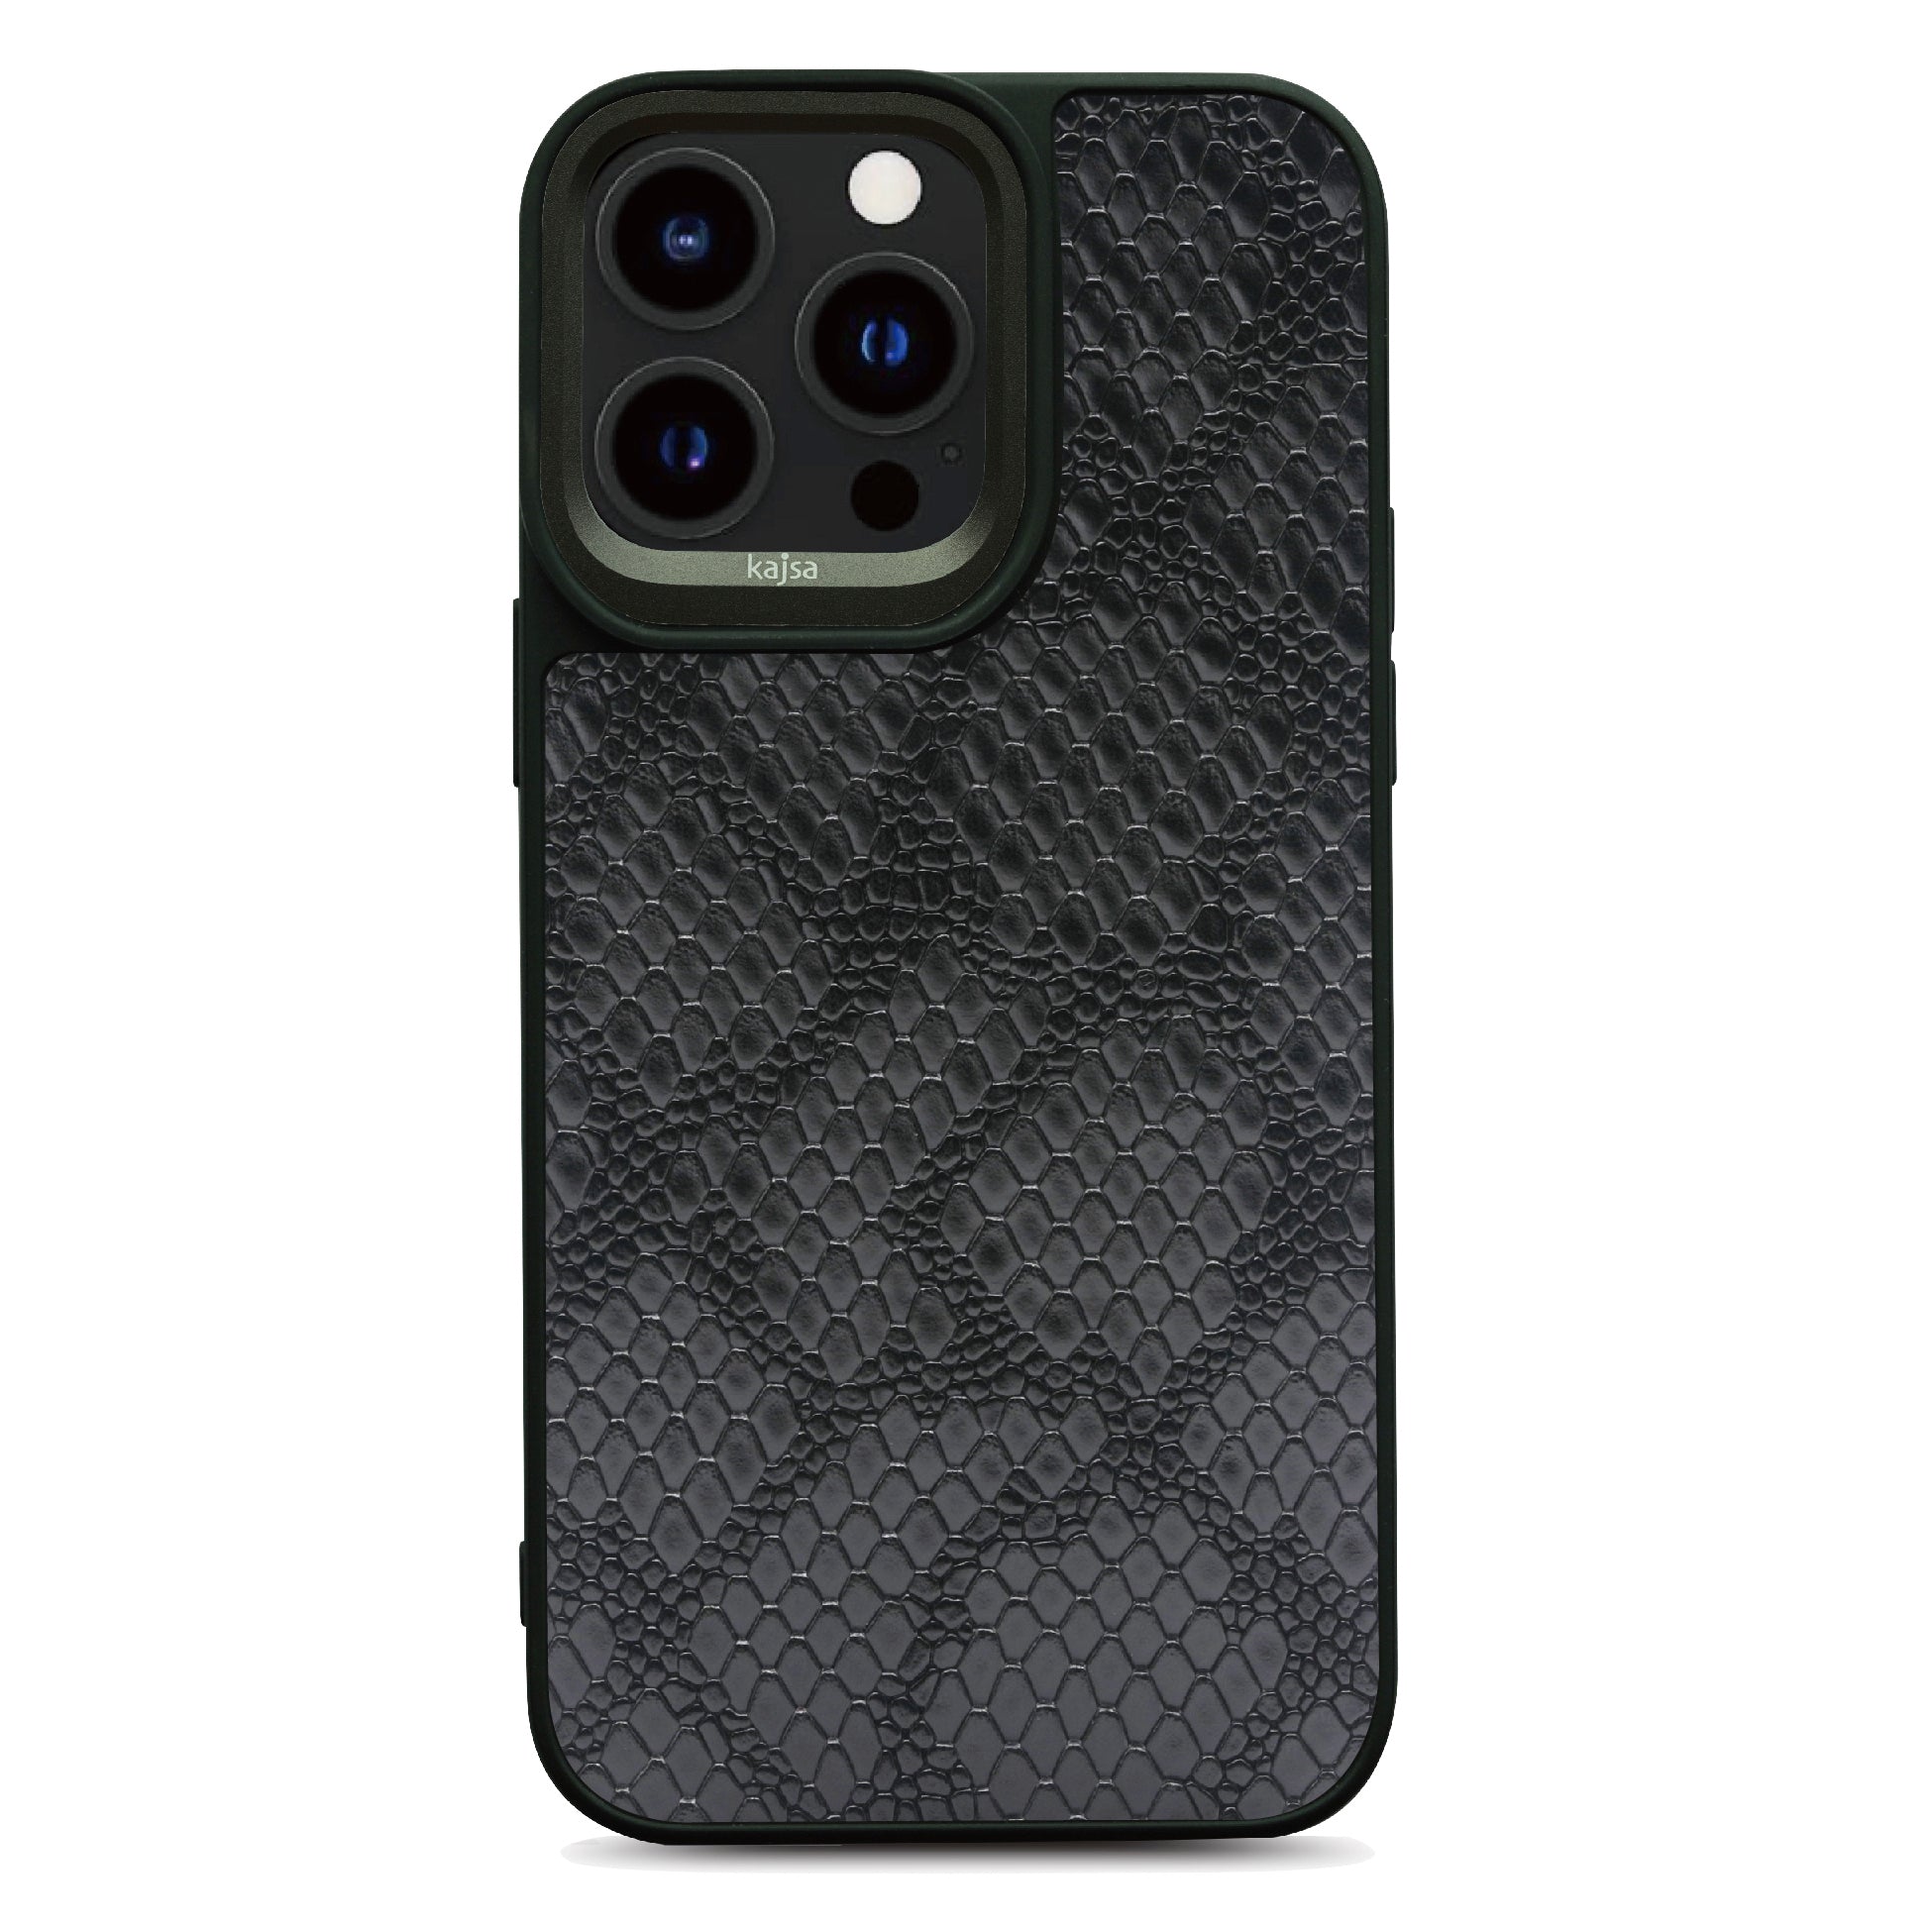 Glamorous Collection - Complex Lizard Back Case for iPhone 14-Phone Case- phone case - phone cases- phone cover- iphone cover- iphone case- iphone cases- leather case- leather cases- DIYCASE - custom case - leather cover - hand strap case - croco pattern case - snake pattern case - carbon fiber phone case - phone case brand - unique phone case - high quality - phone case brand - protective case - buy phone case hong kong - online buy phone case - iphone‎手機殼 - 客製化手機殼 - samsung ‎手機殼 - 香港手機殼 - 買電話殼